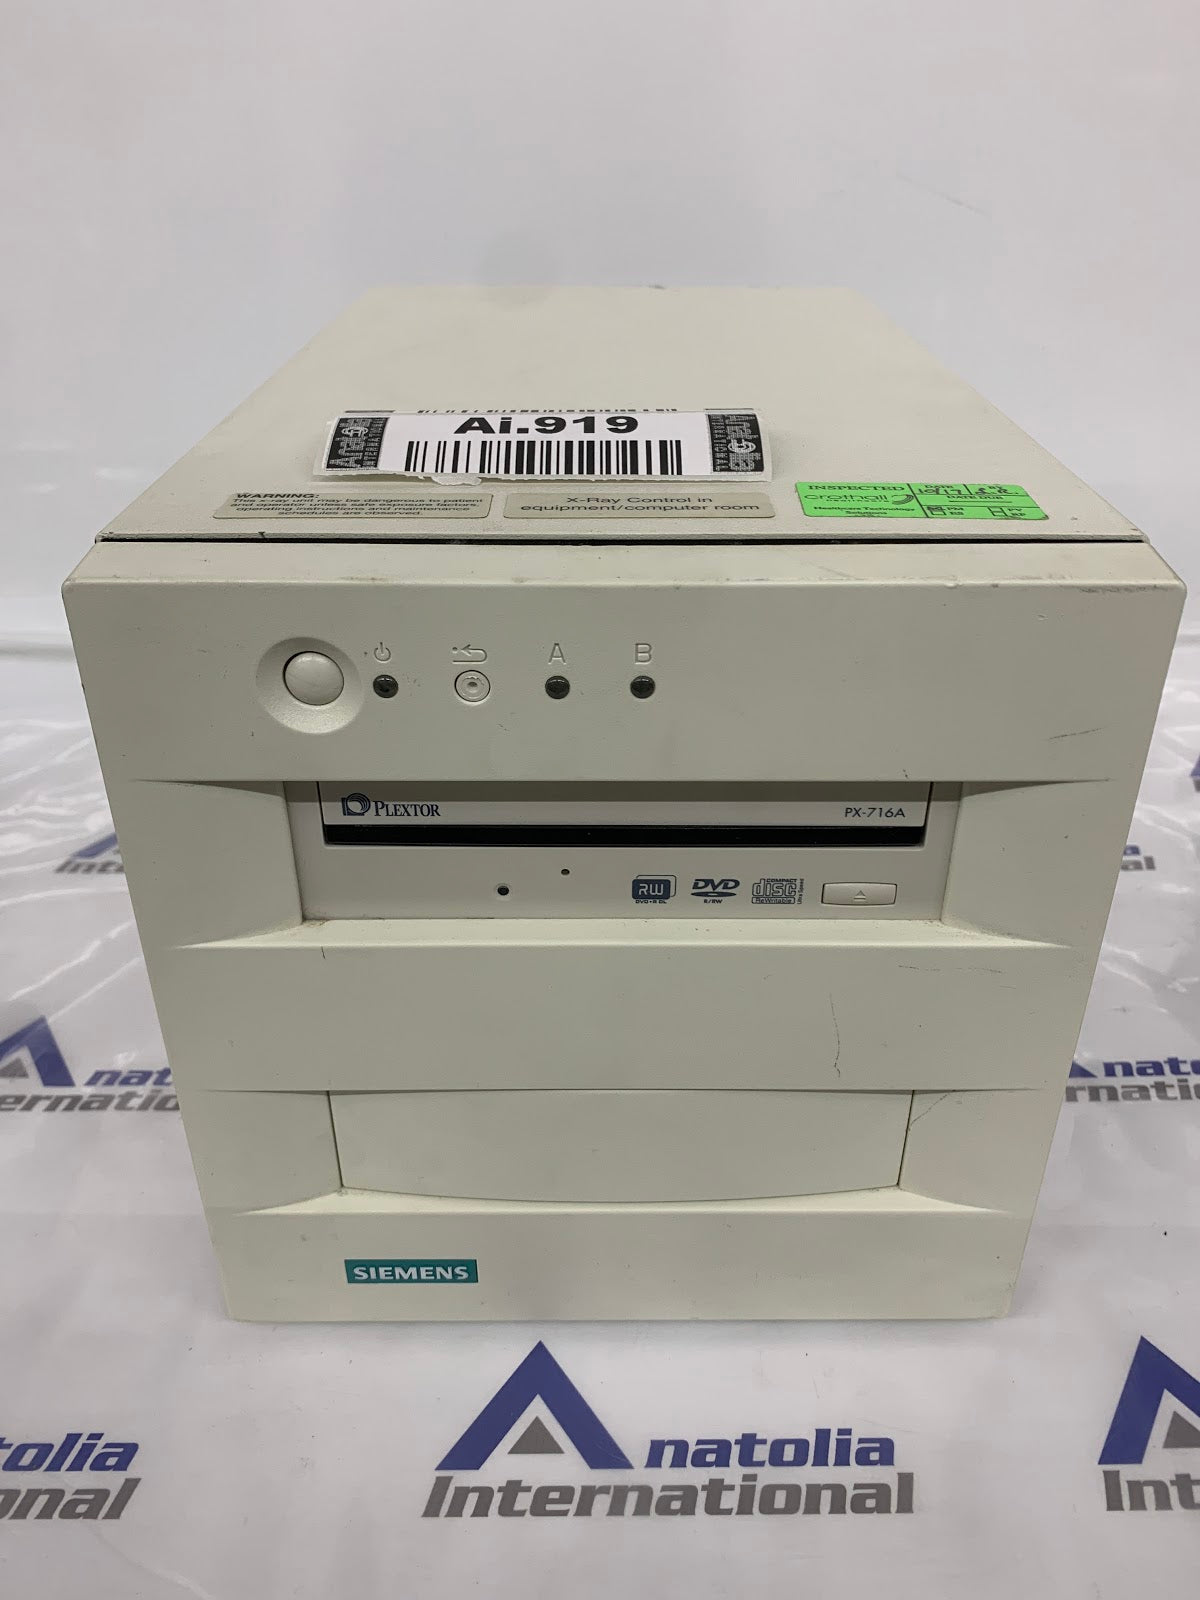 Remote Power Archive Unit 2 For Siemens P/N:10051974
10051972. Pulled from functioning Equipment, contact for more info.